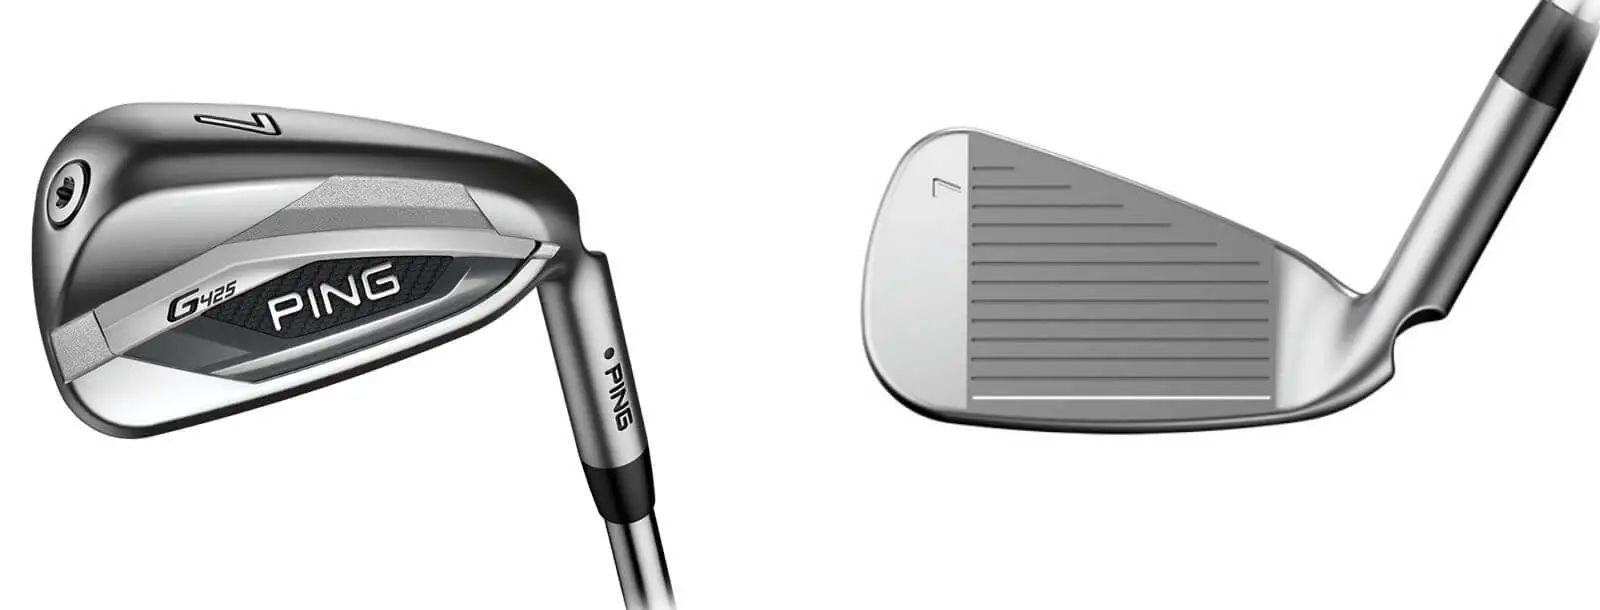 Ping G425 Irons Specs